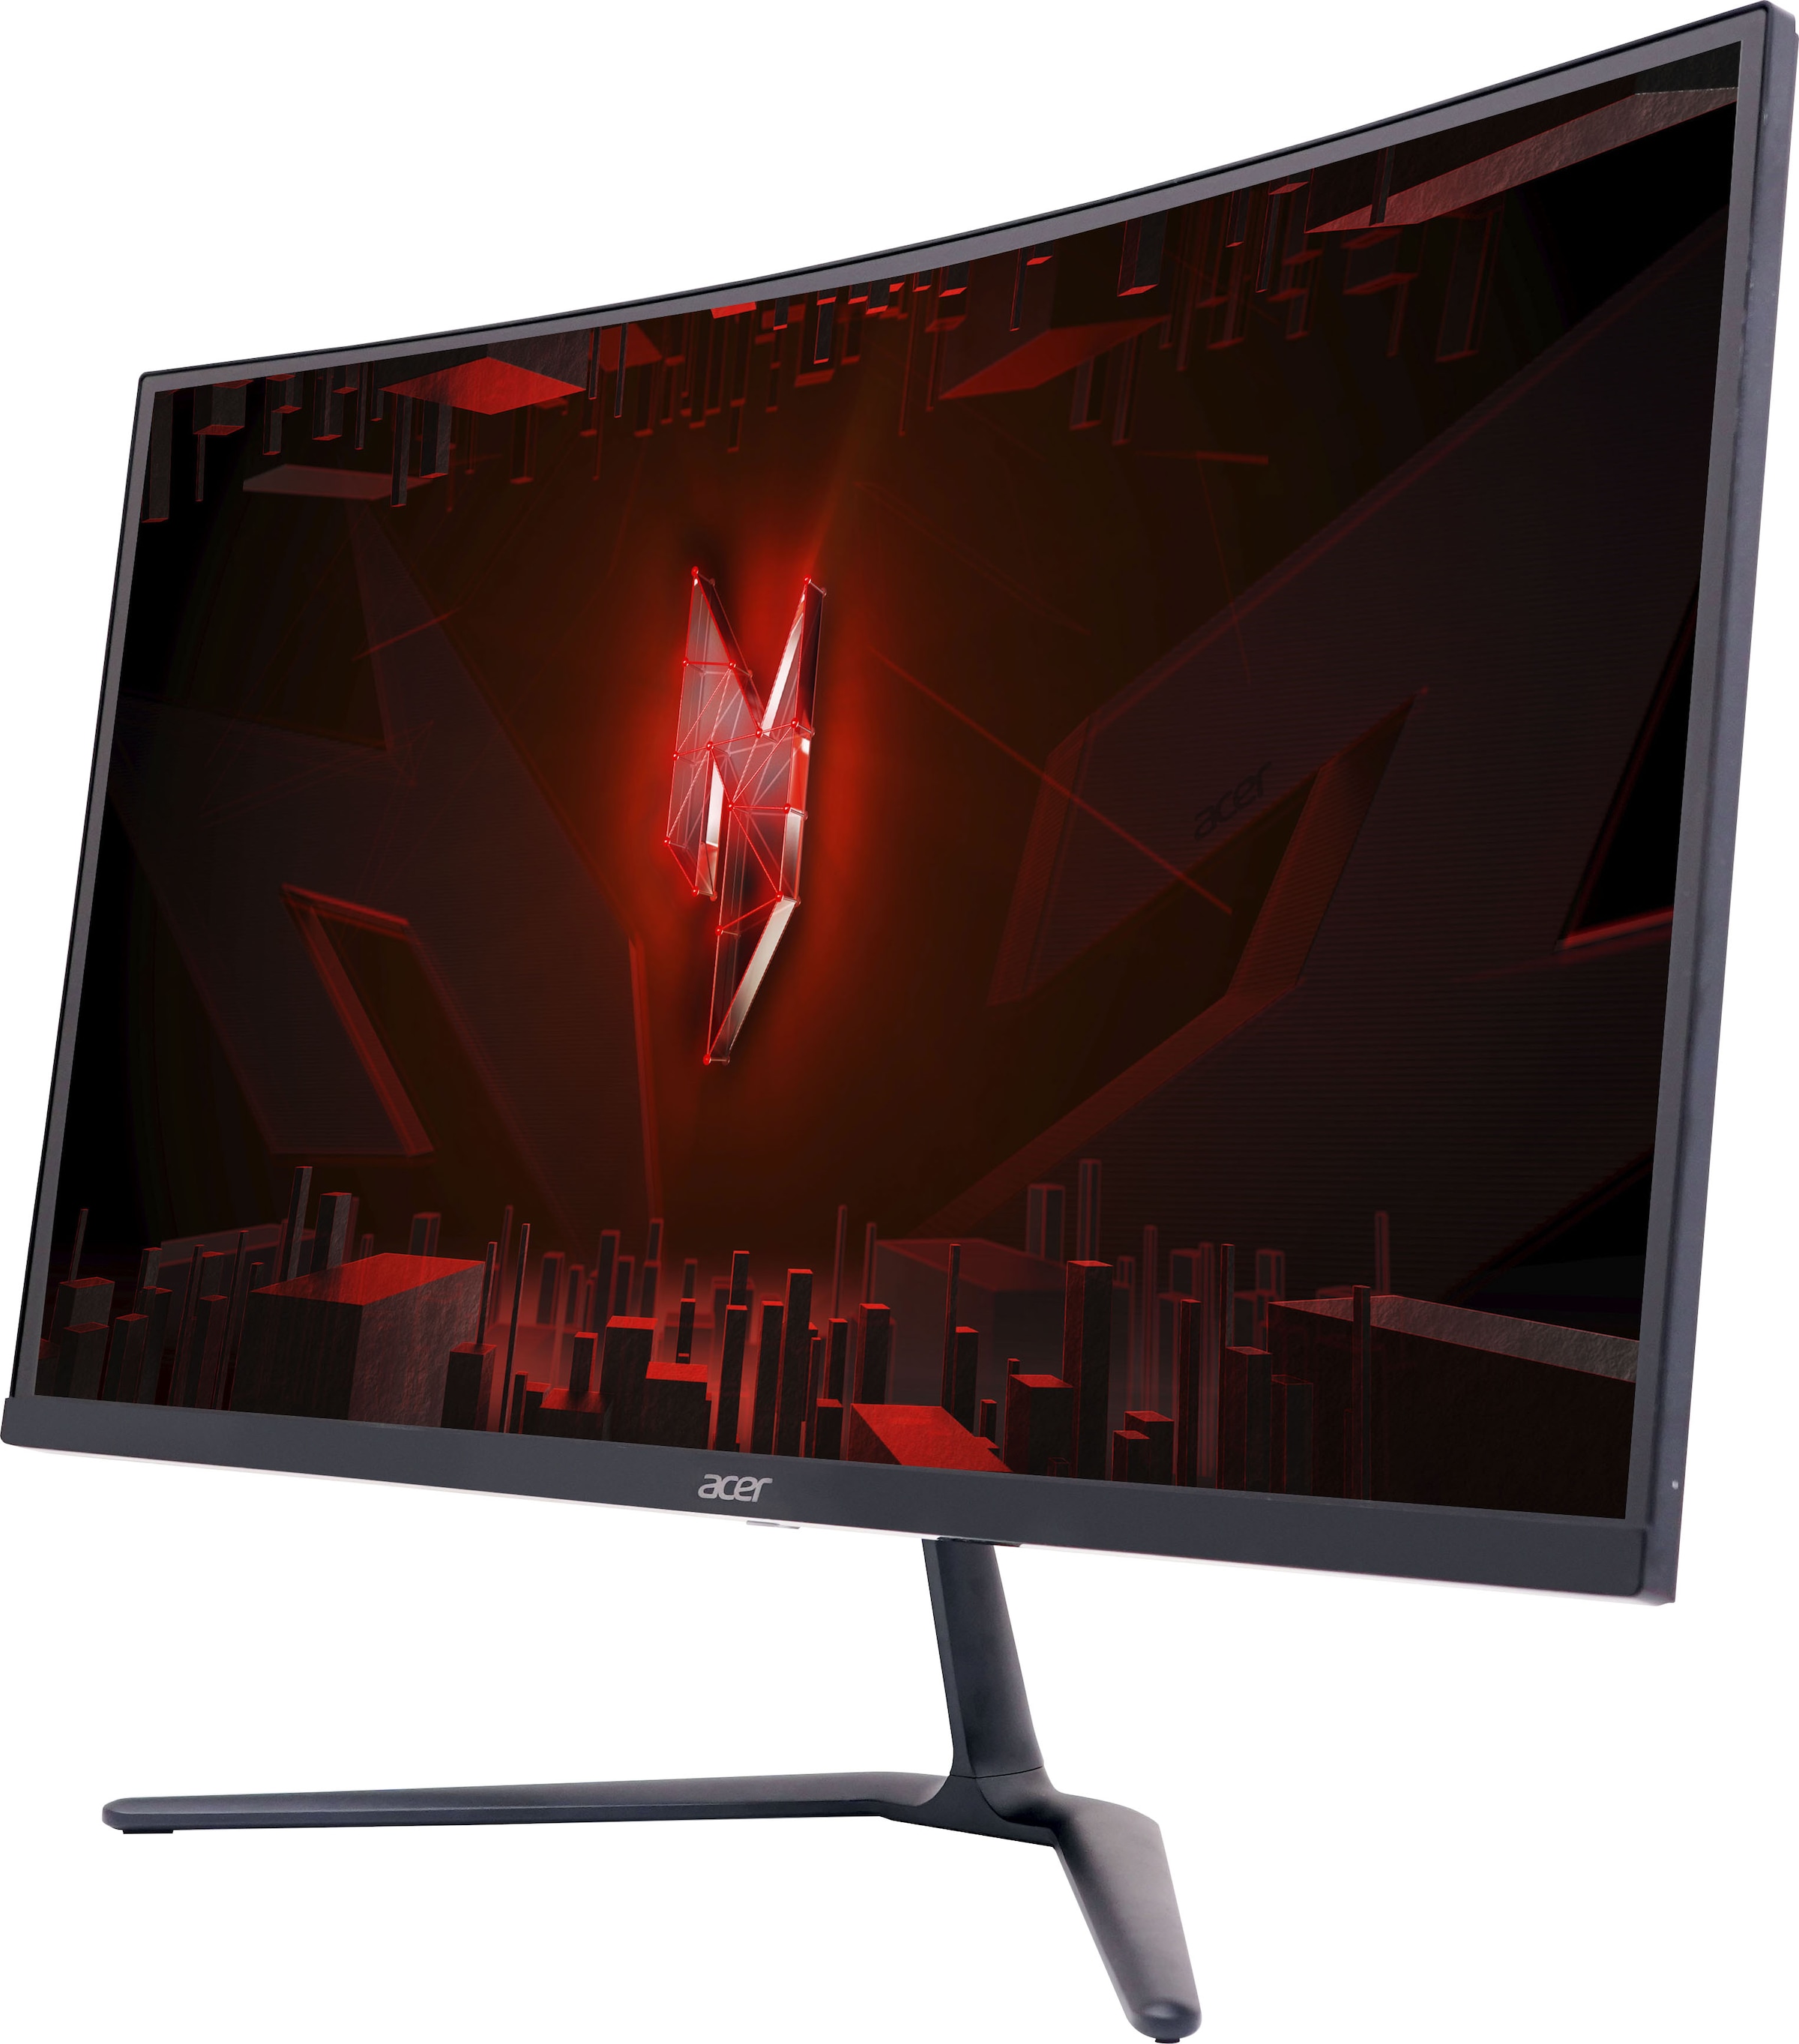 Acer Curved-Gaming-LED-Monitor »Nitro jetzt px, ms 1 Hz bei 1080 ED270R«, 165 68,6 OTTO HD, cm/27 Reaktionszeit, 1920 x Zoll, Full online